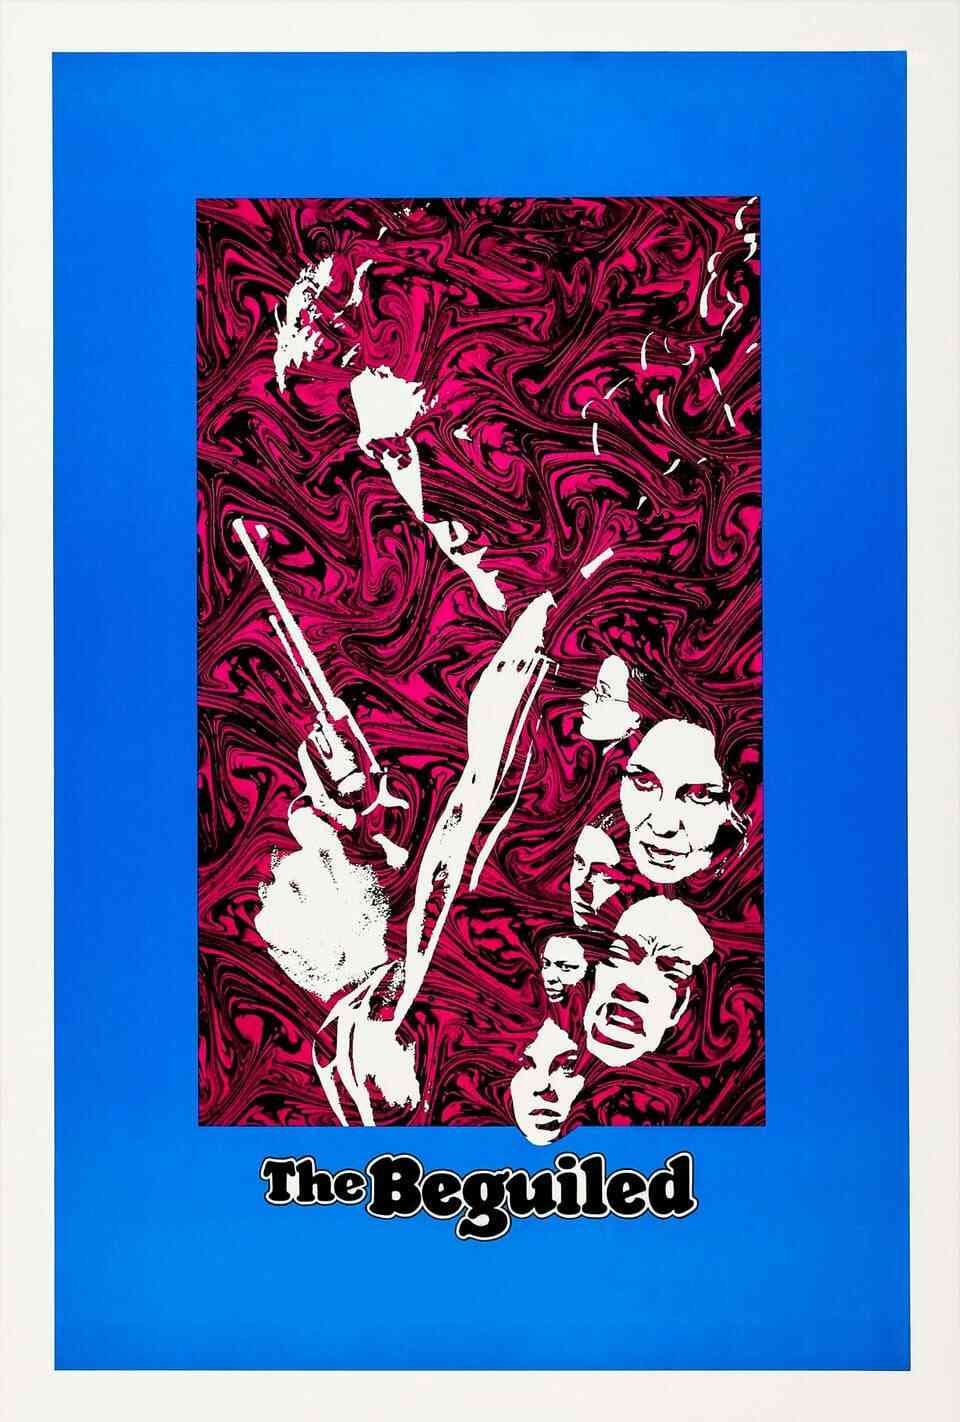 Read The Beguiled screenplay (poster)